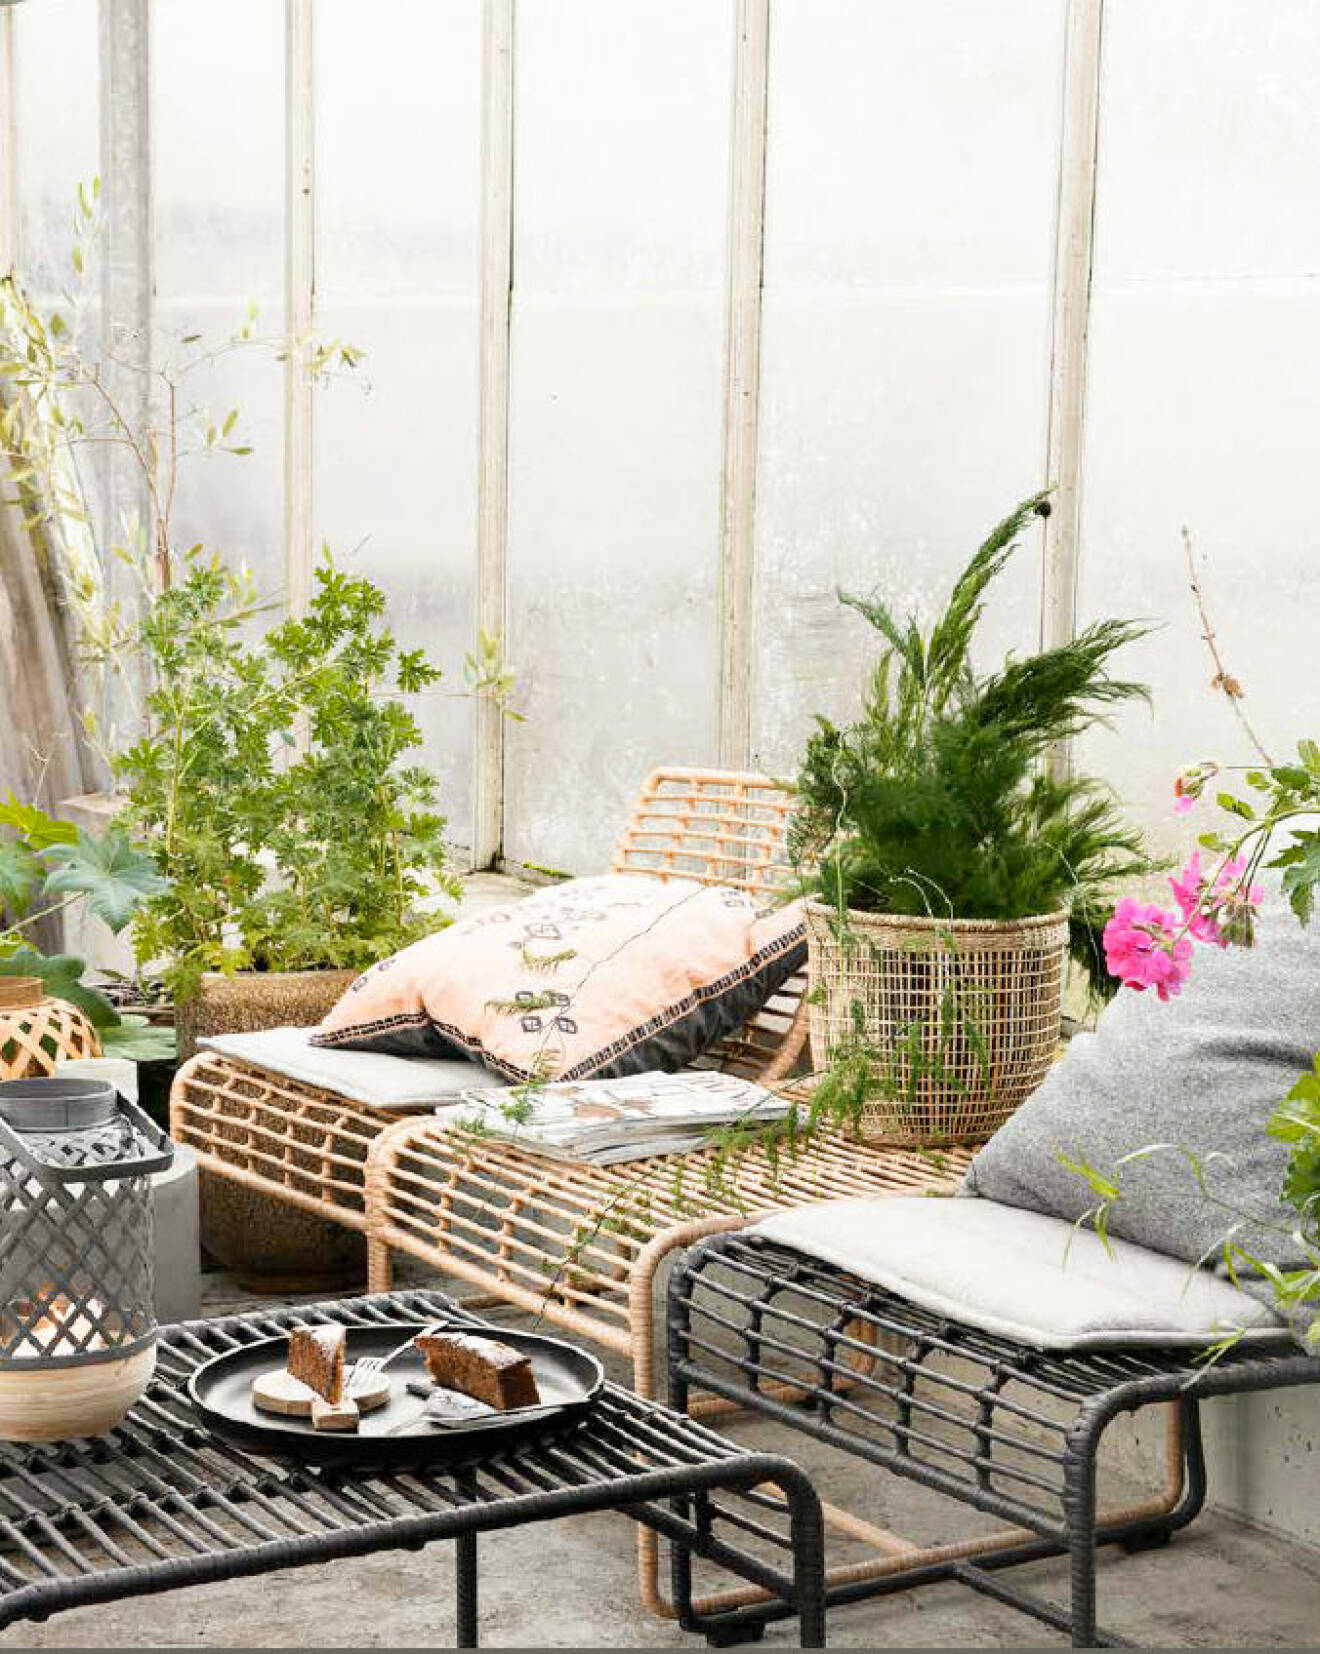 Rattan chairs at the balcony with pillows and plants. Outdoor furniture from House doctor.